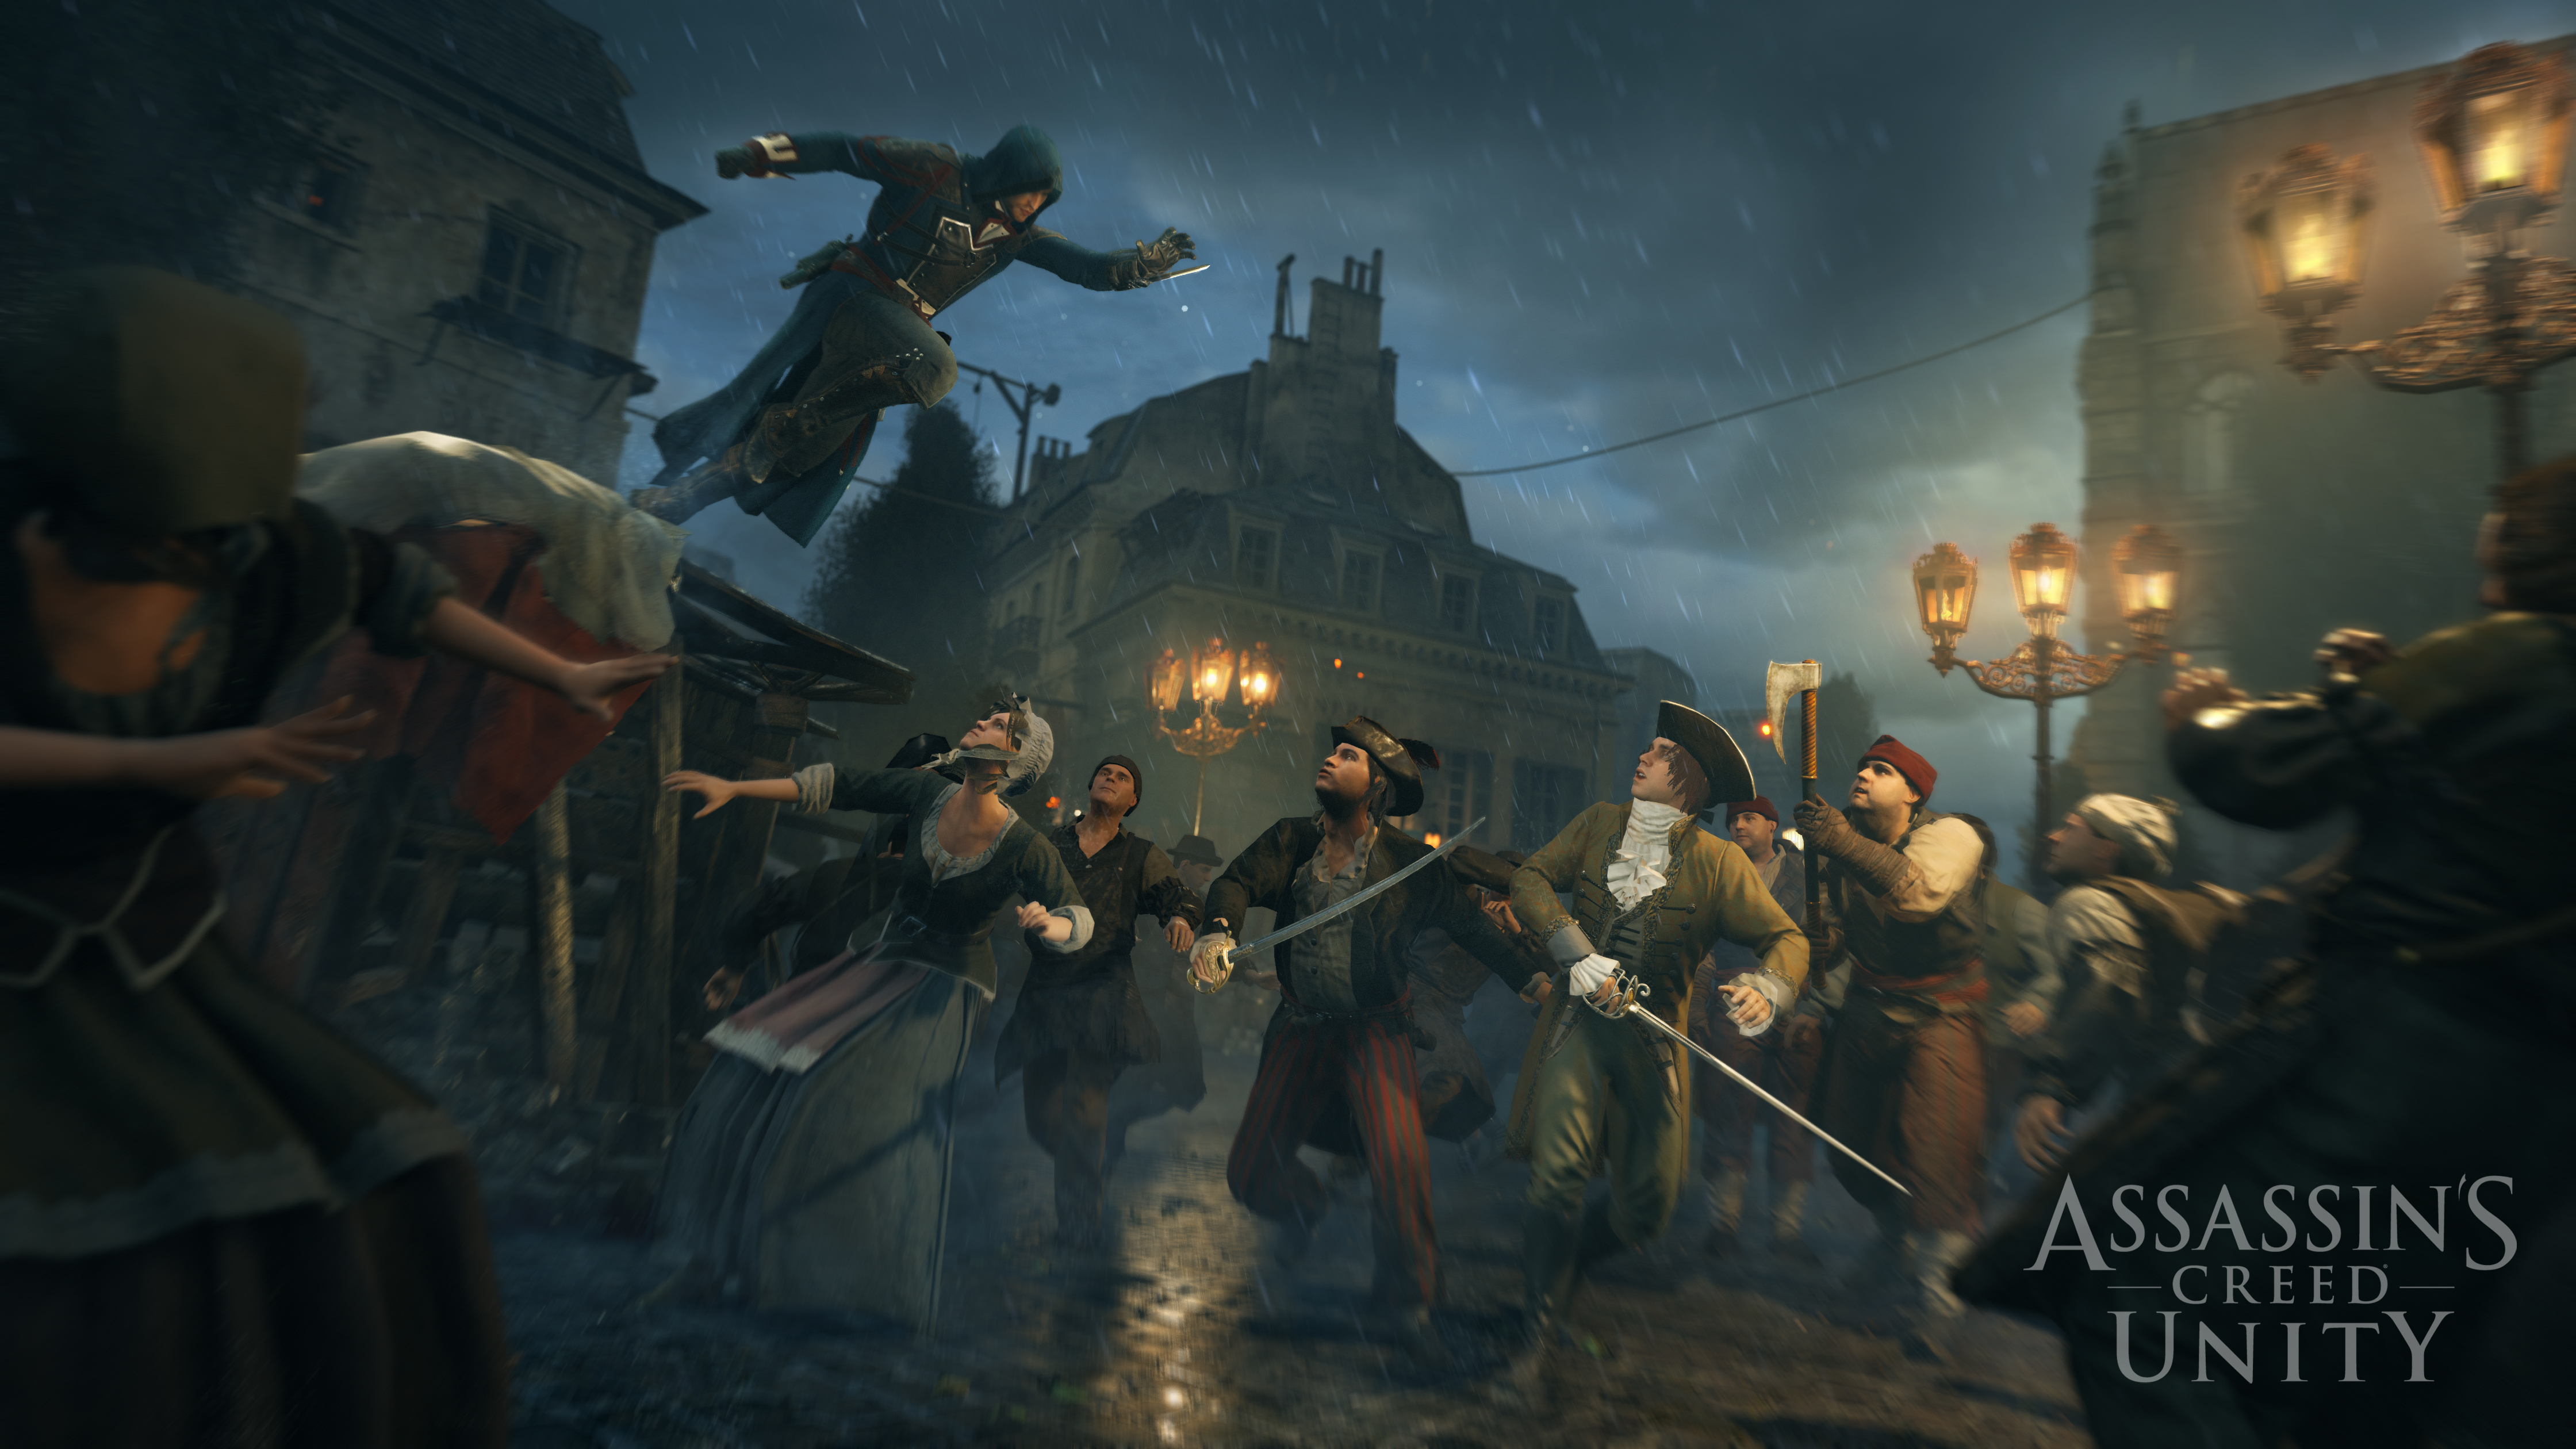 Video Game Assassins Creed Unity Wallpaper:4480x2520